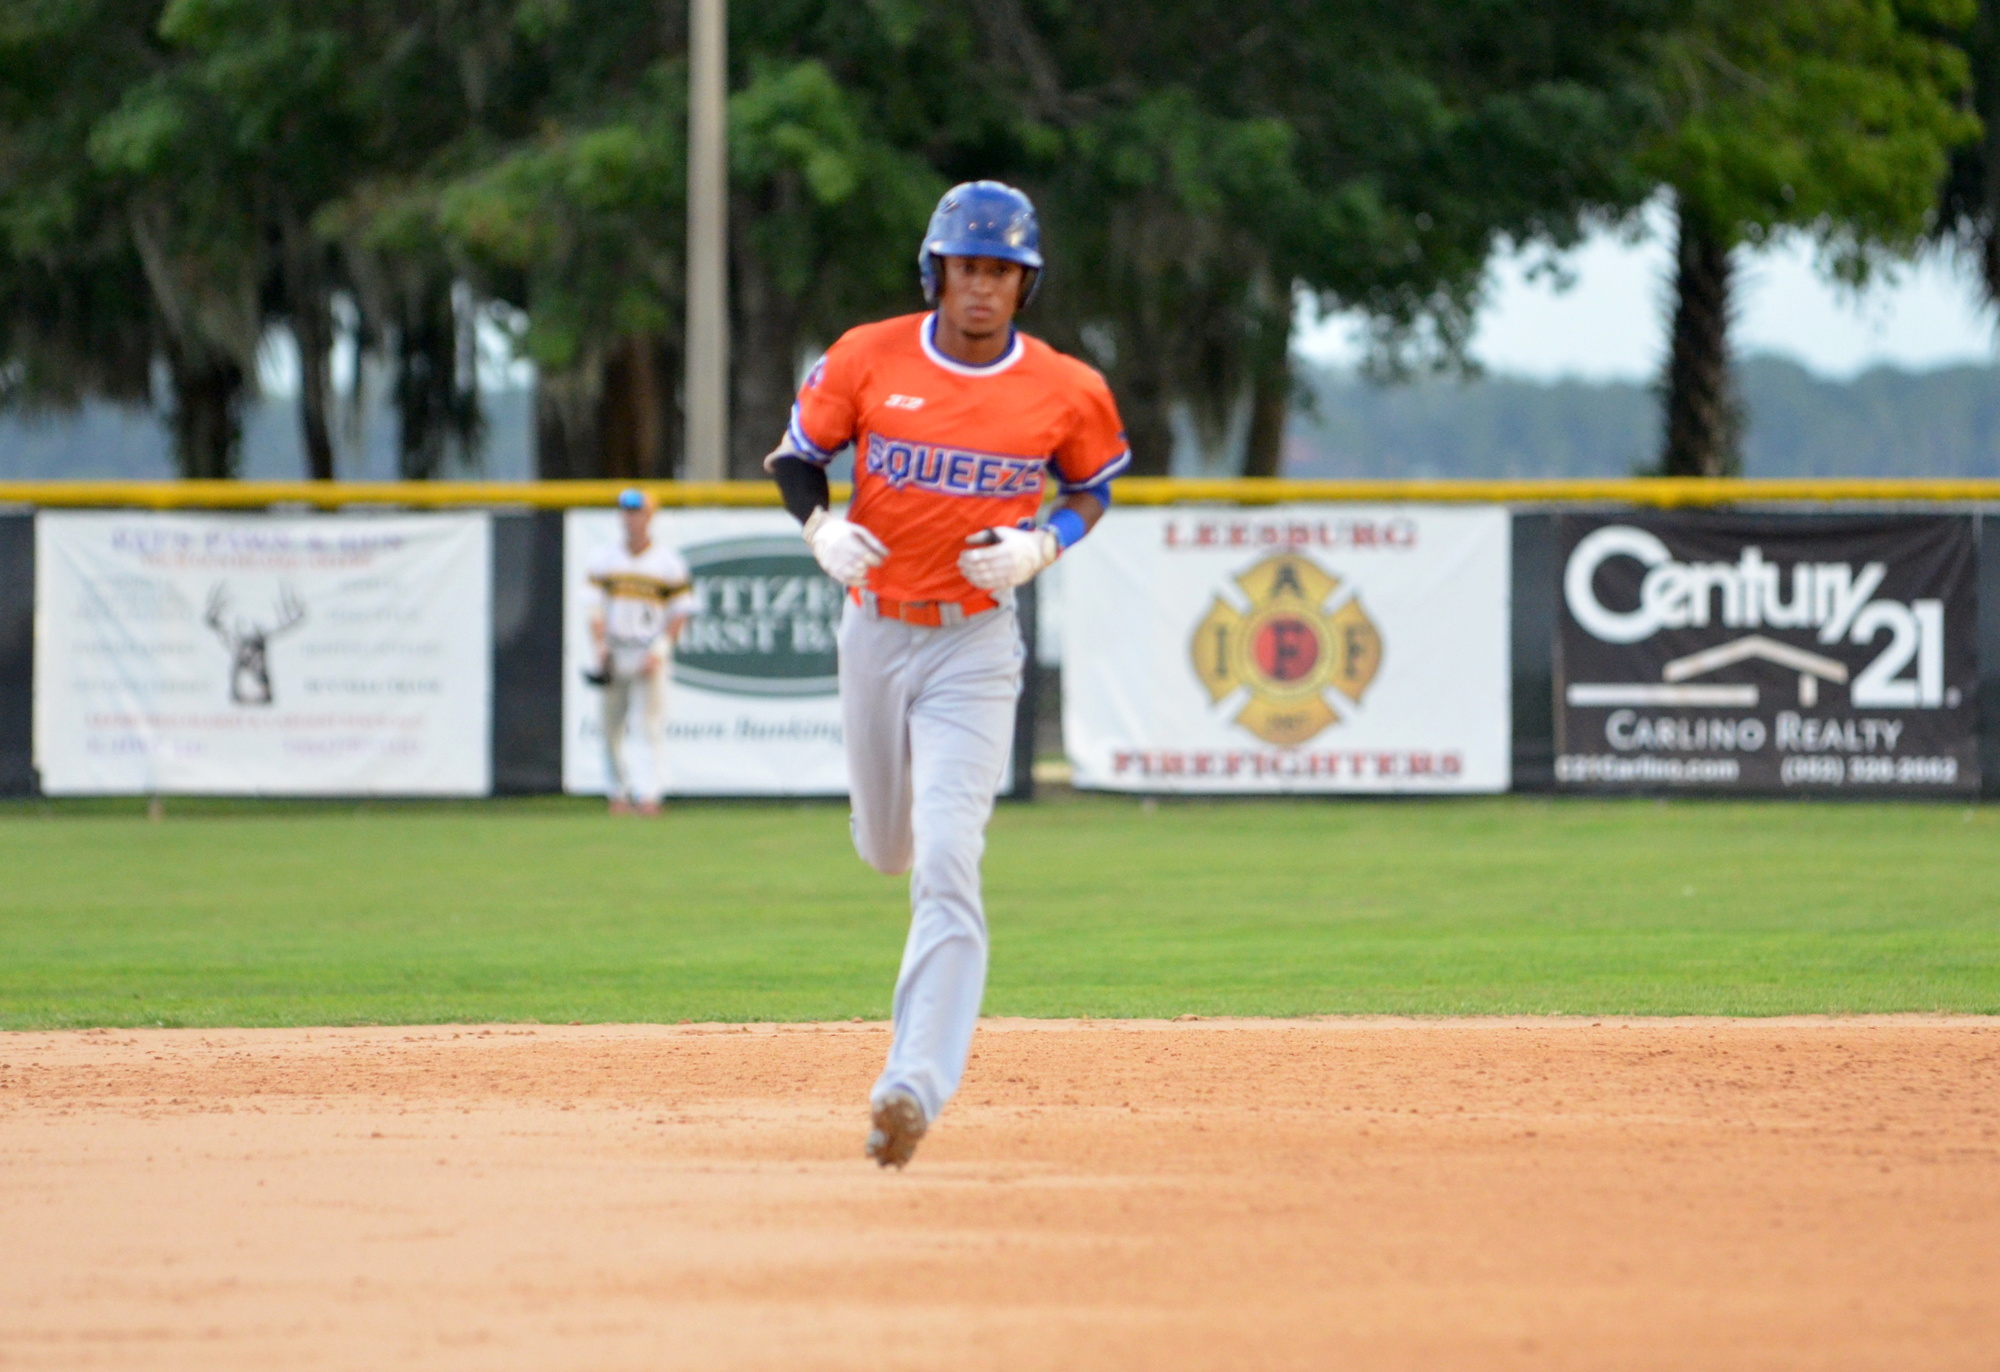 Kyle Corbin rounds the bases after slugging a home run against Leesburg August 1.